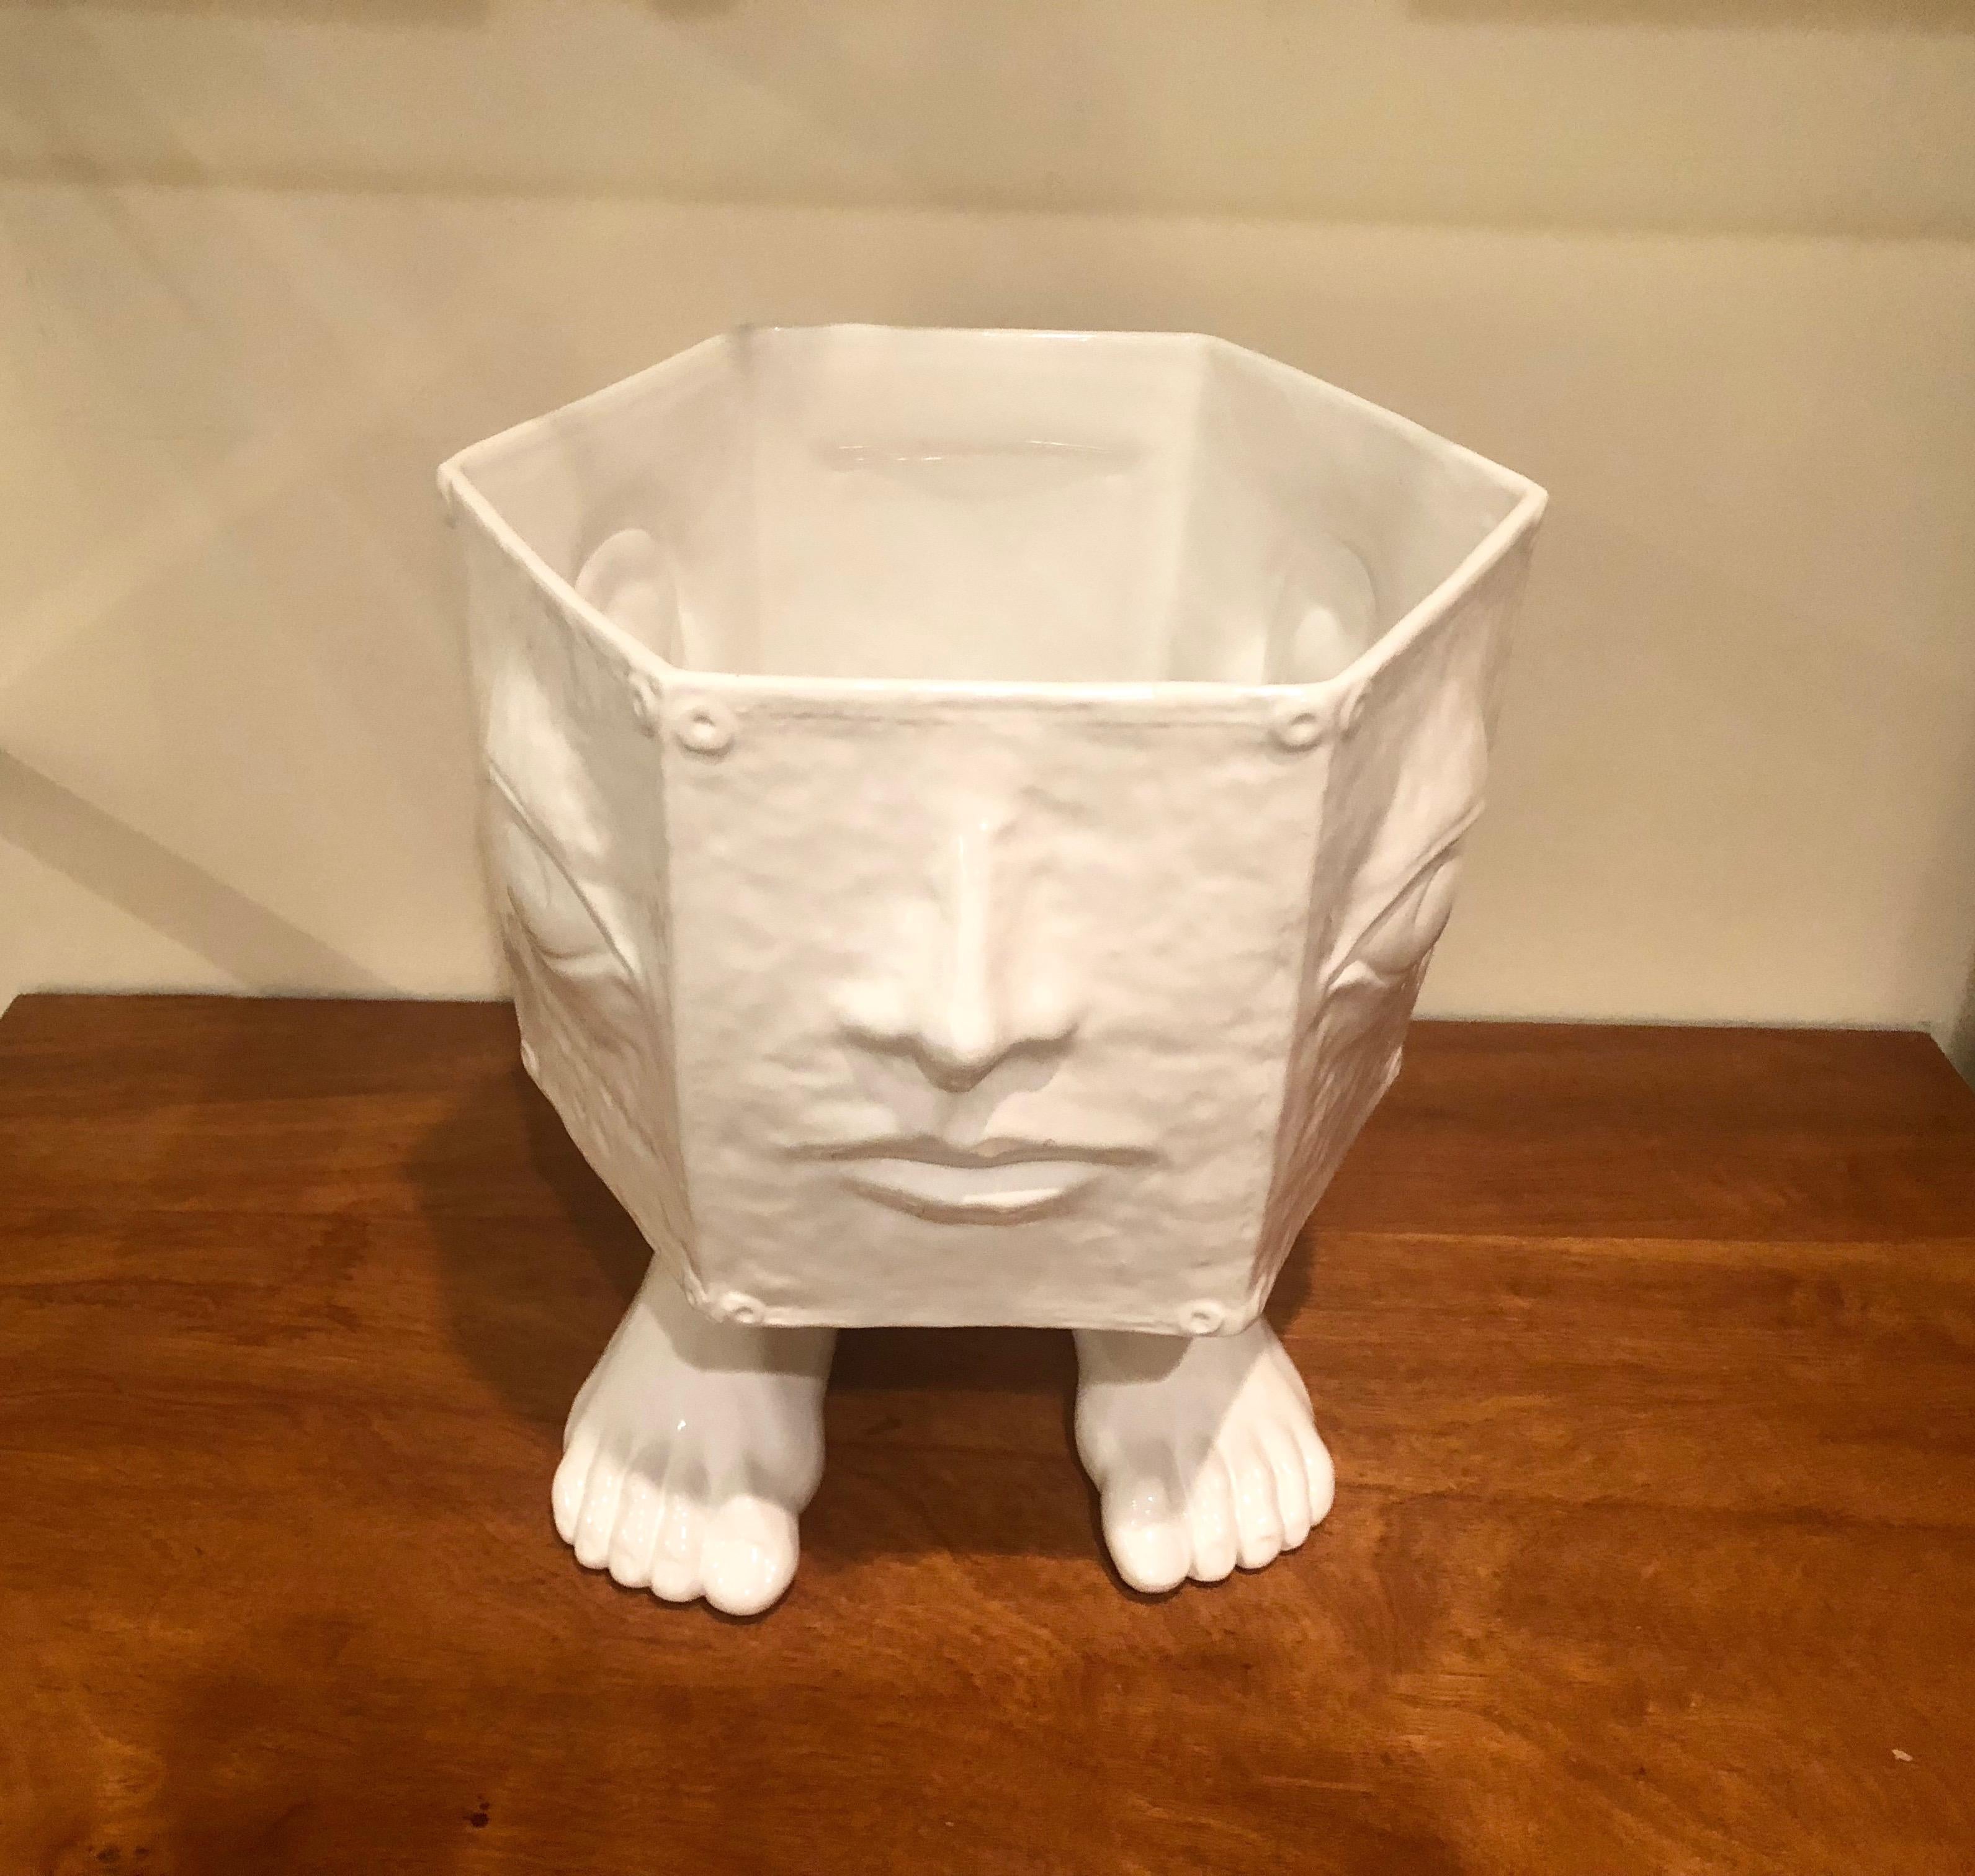 Italian hexagonal shaped planter by 'Taste Setter by Sigma' in white textured glaze ceramic that has a body feature on each side (a nose and mouth on the front, a left eyeball, a left ear, a pentagonal shape on the back side, a right ear, and a